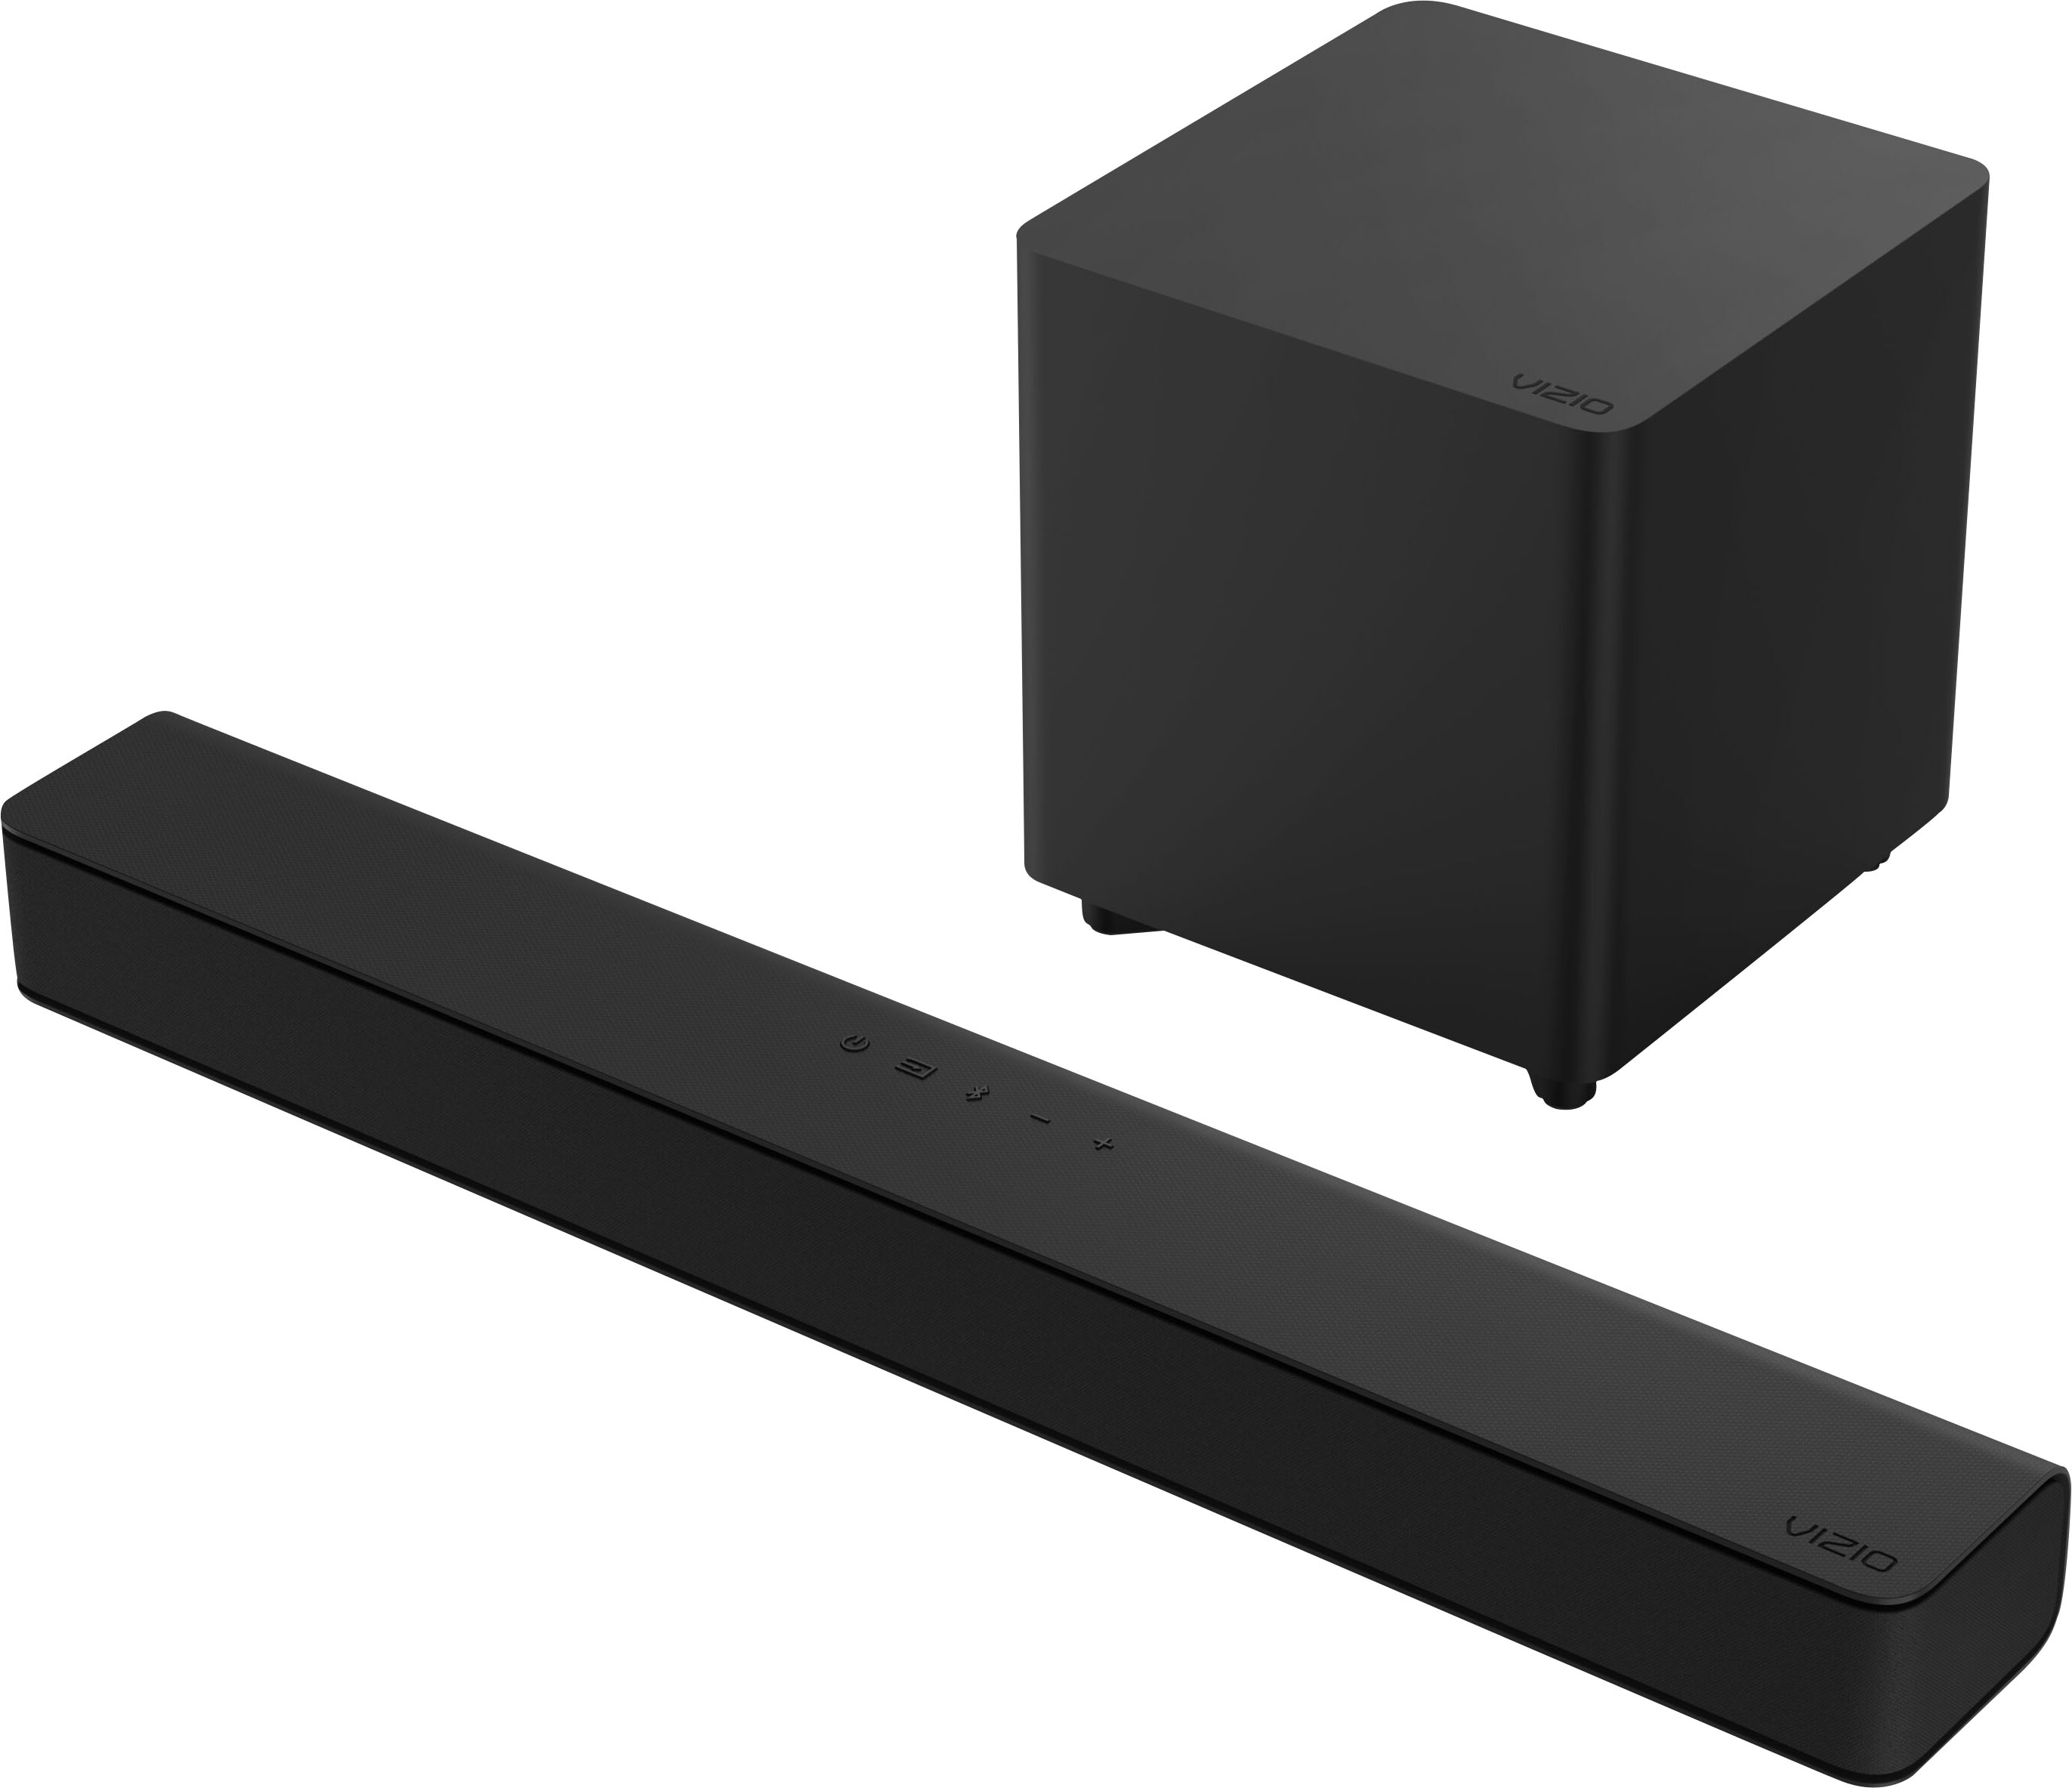 Angle View: LG - 3.1 Channel Soundbar with Wireless Subwoofer and DTS Virtual:X - Black